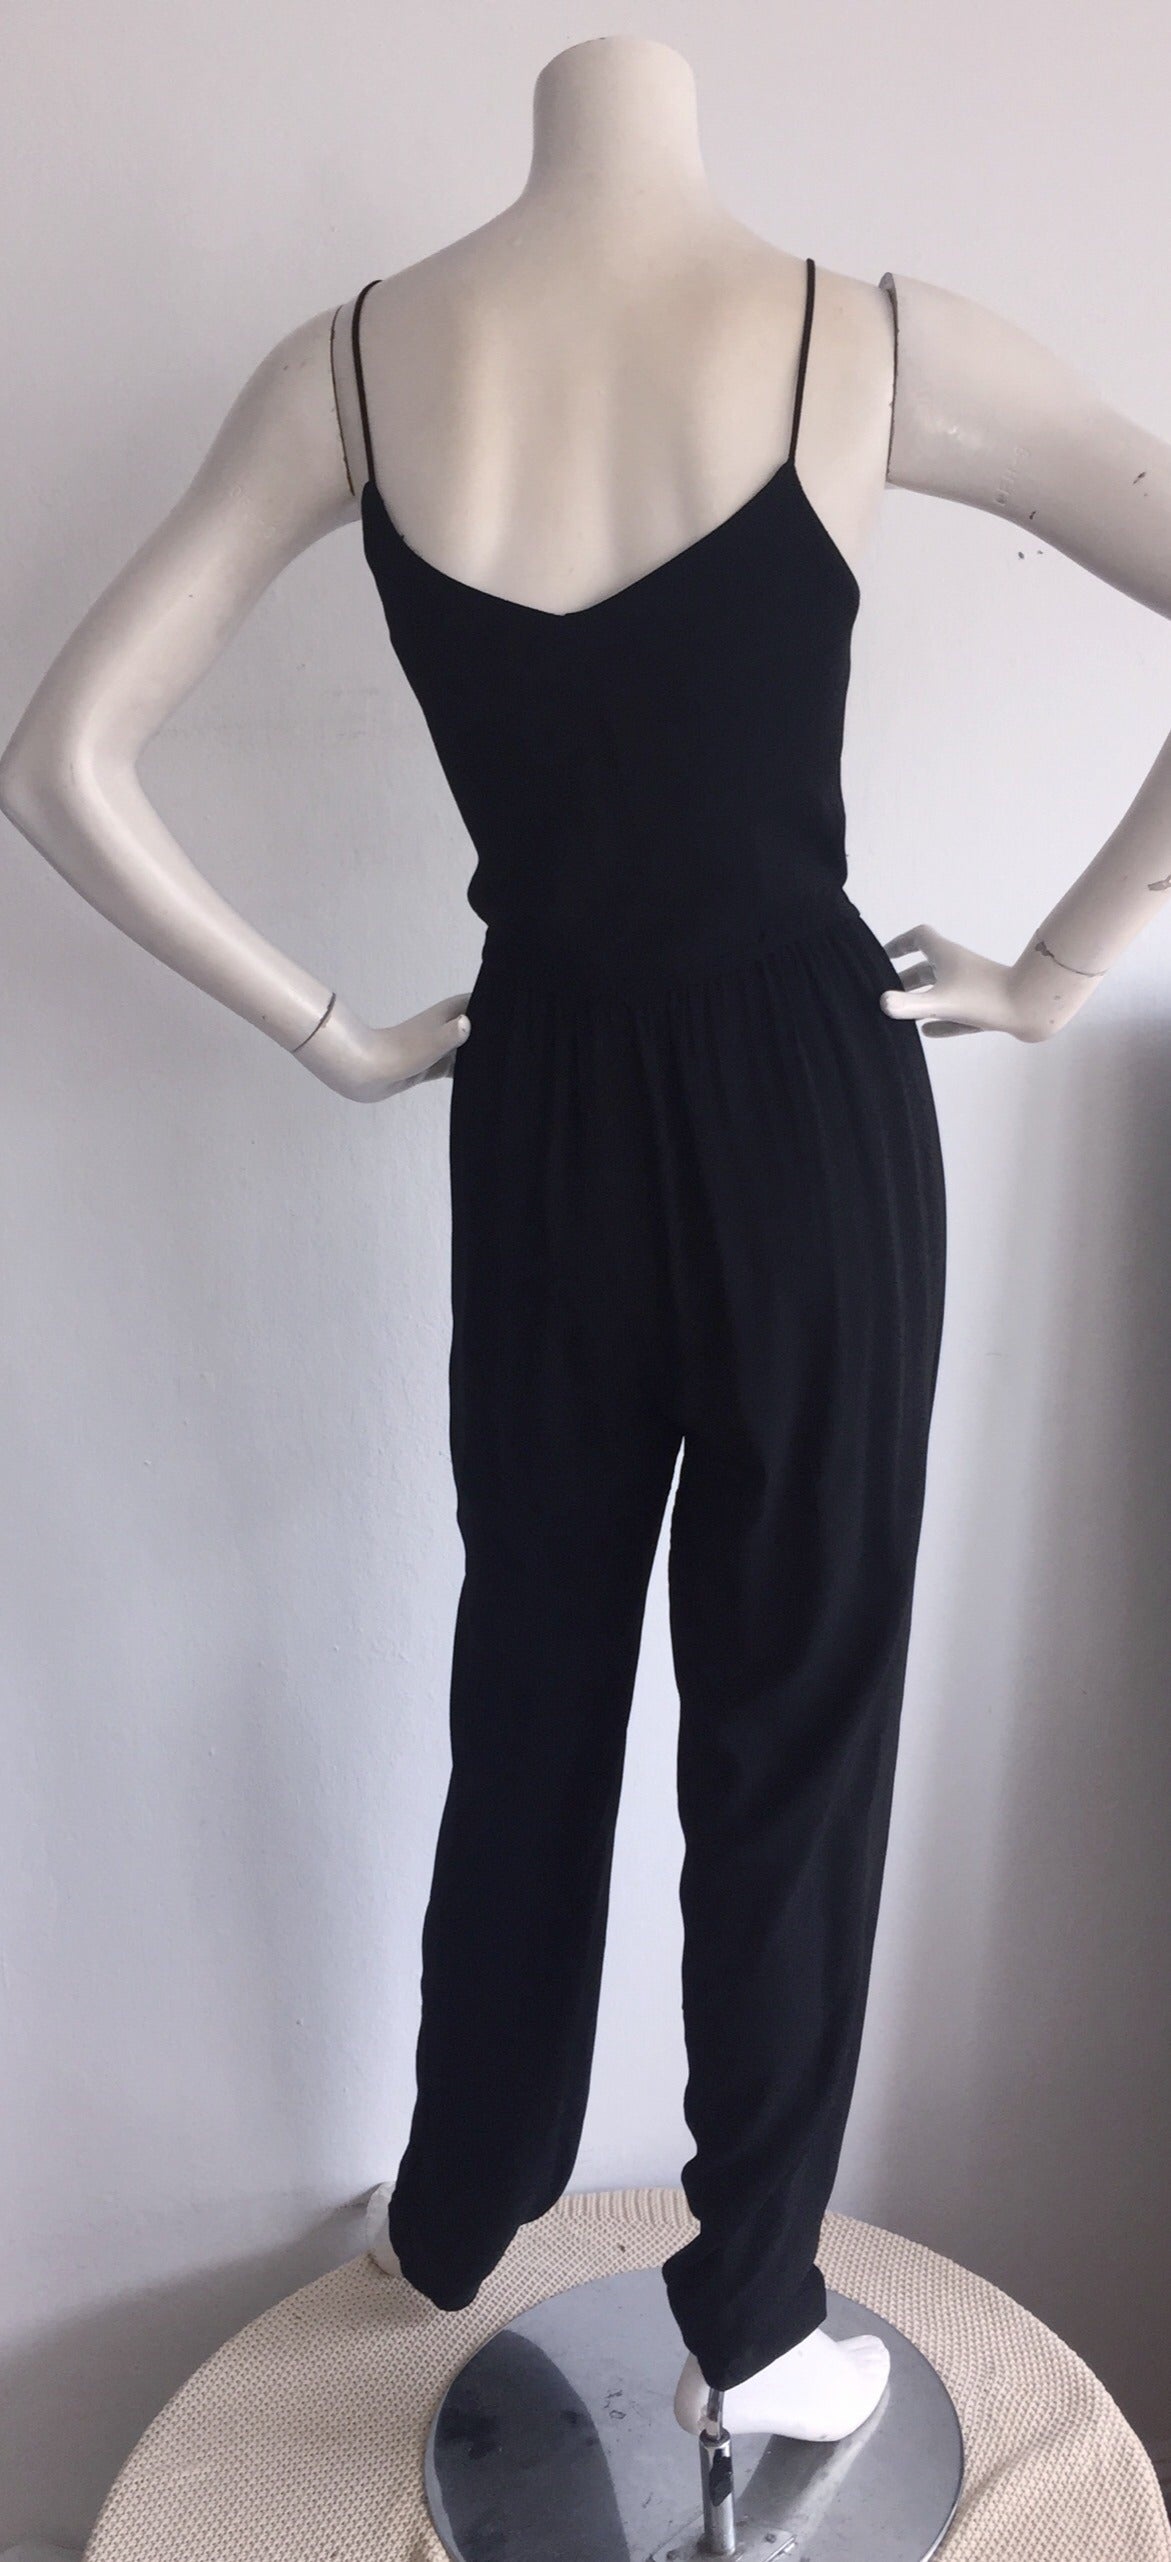 Incredible Vintage Judy Hornby Couture Black Crepe Jumpsuit In Excellent Condition For Sale In San Diego, CA